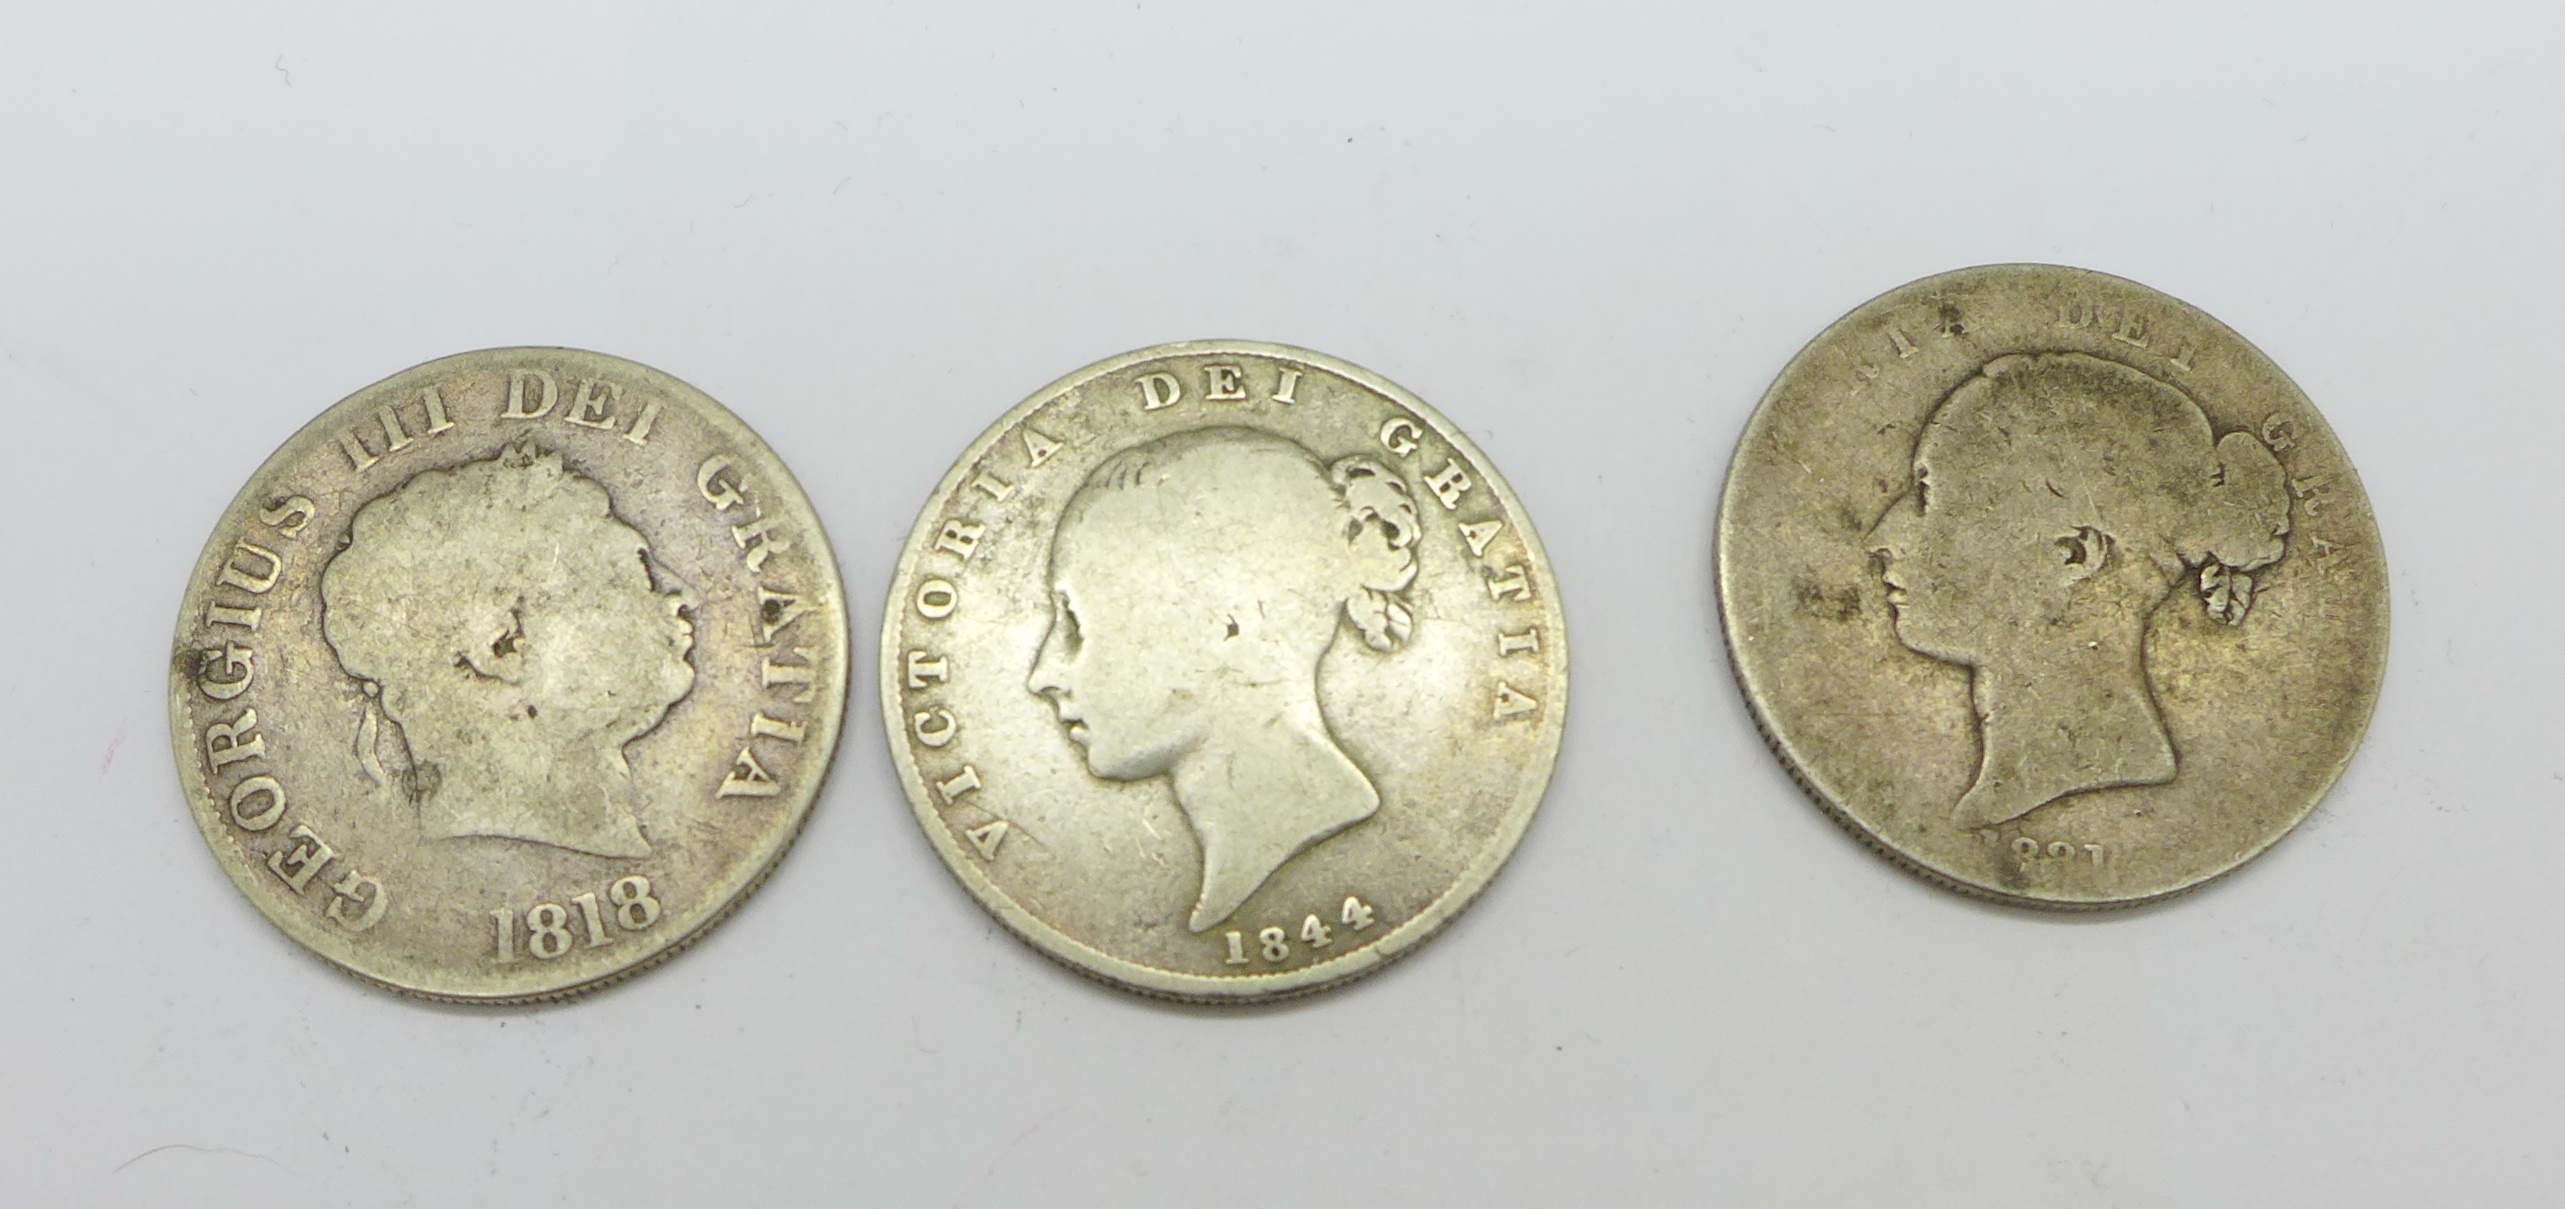 Three silver half crowns, 1818, 1844 and 1881 - Image 2 of 2